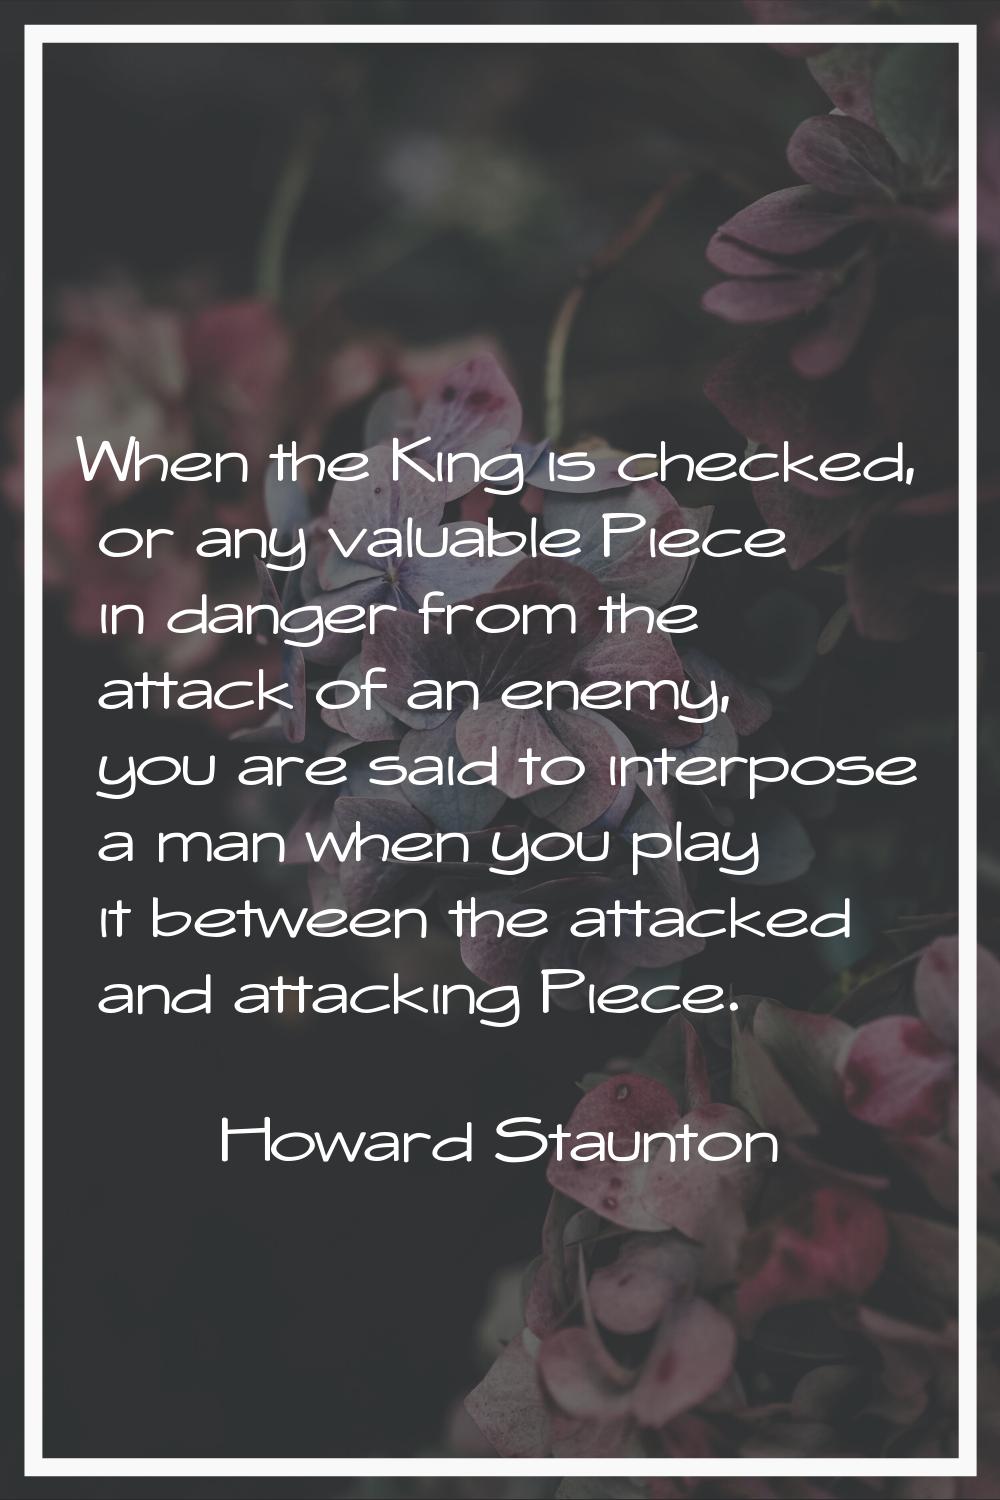 When the King is checked, or any valuable Piece in danger from the attack of an enemy, you are said